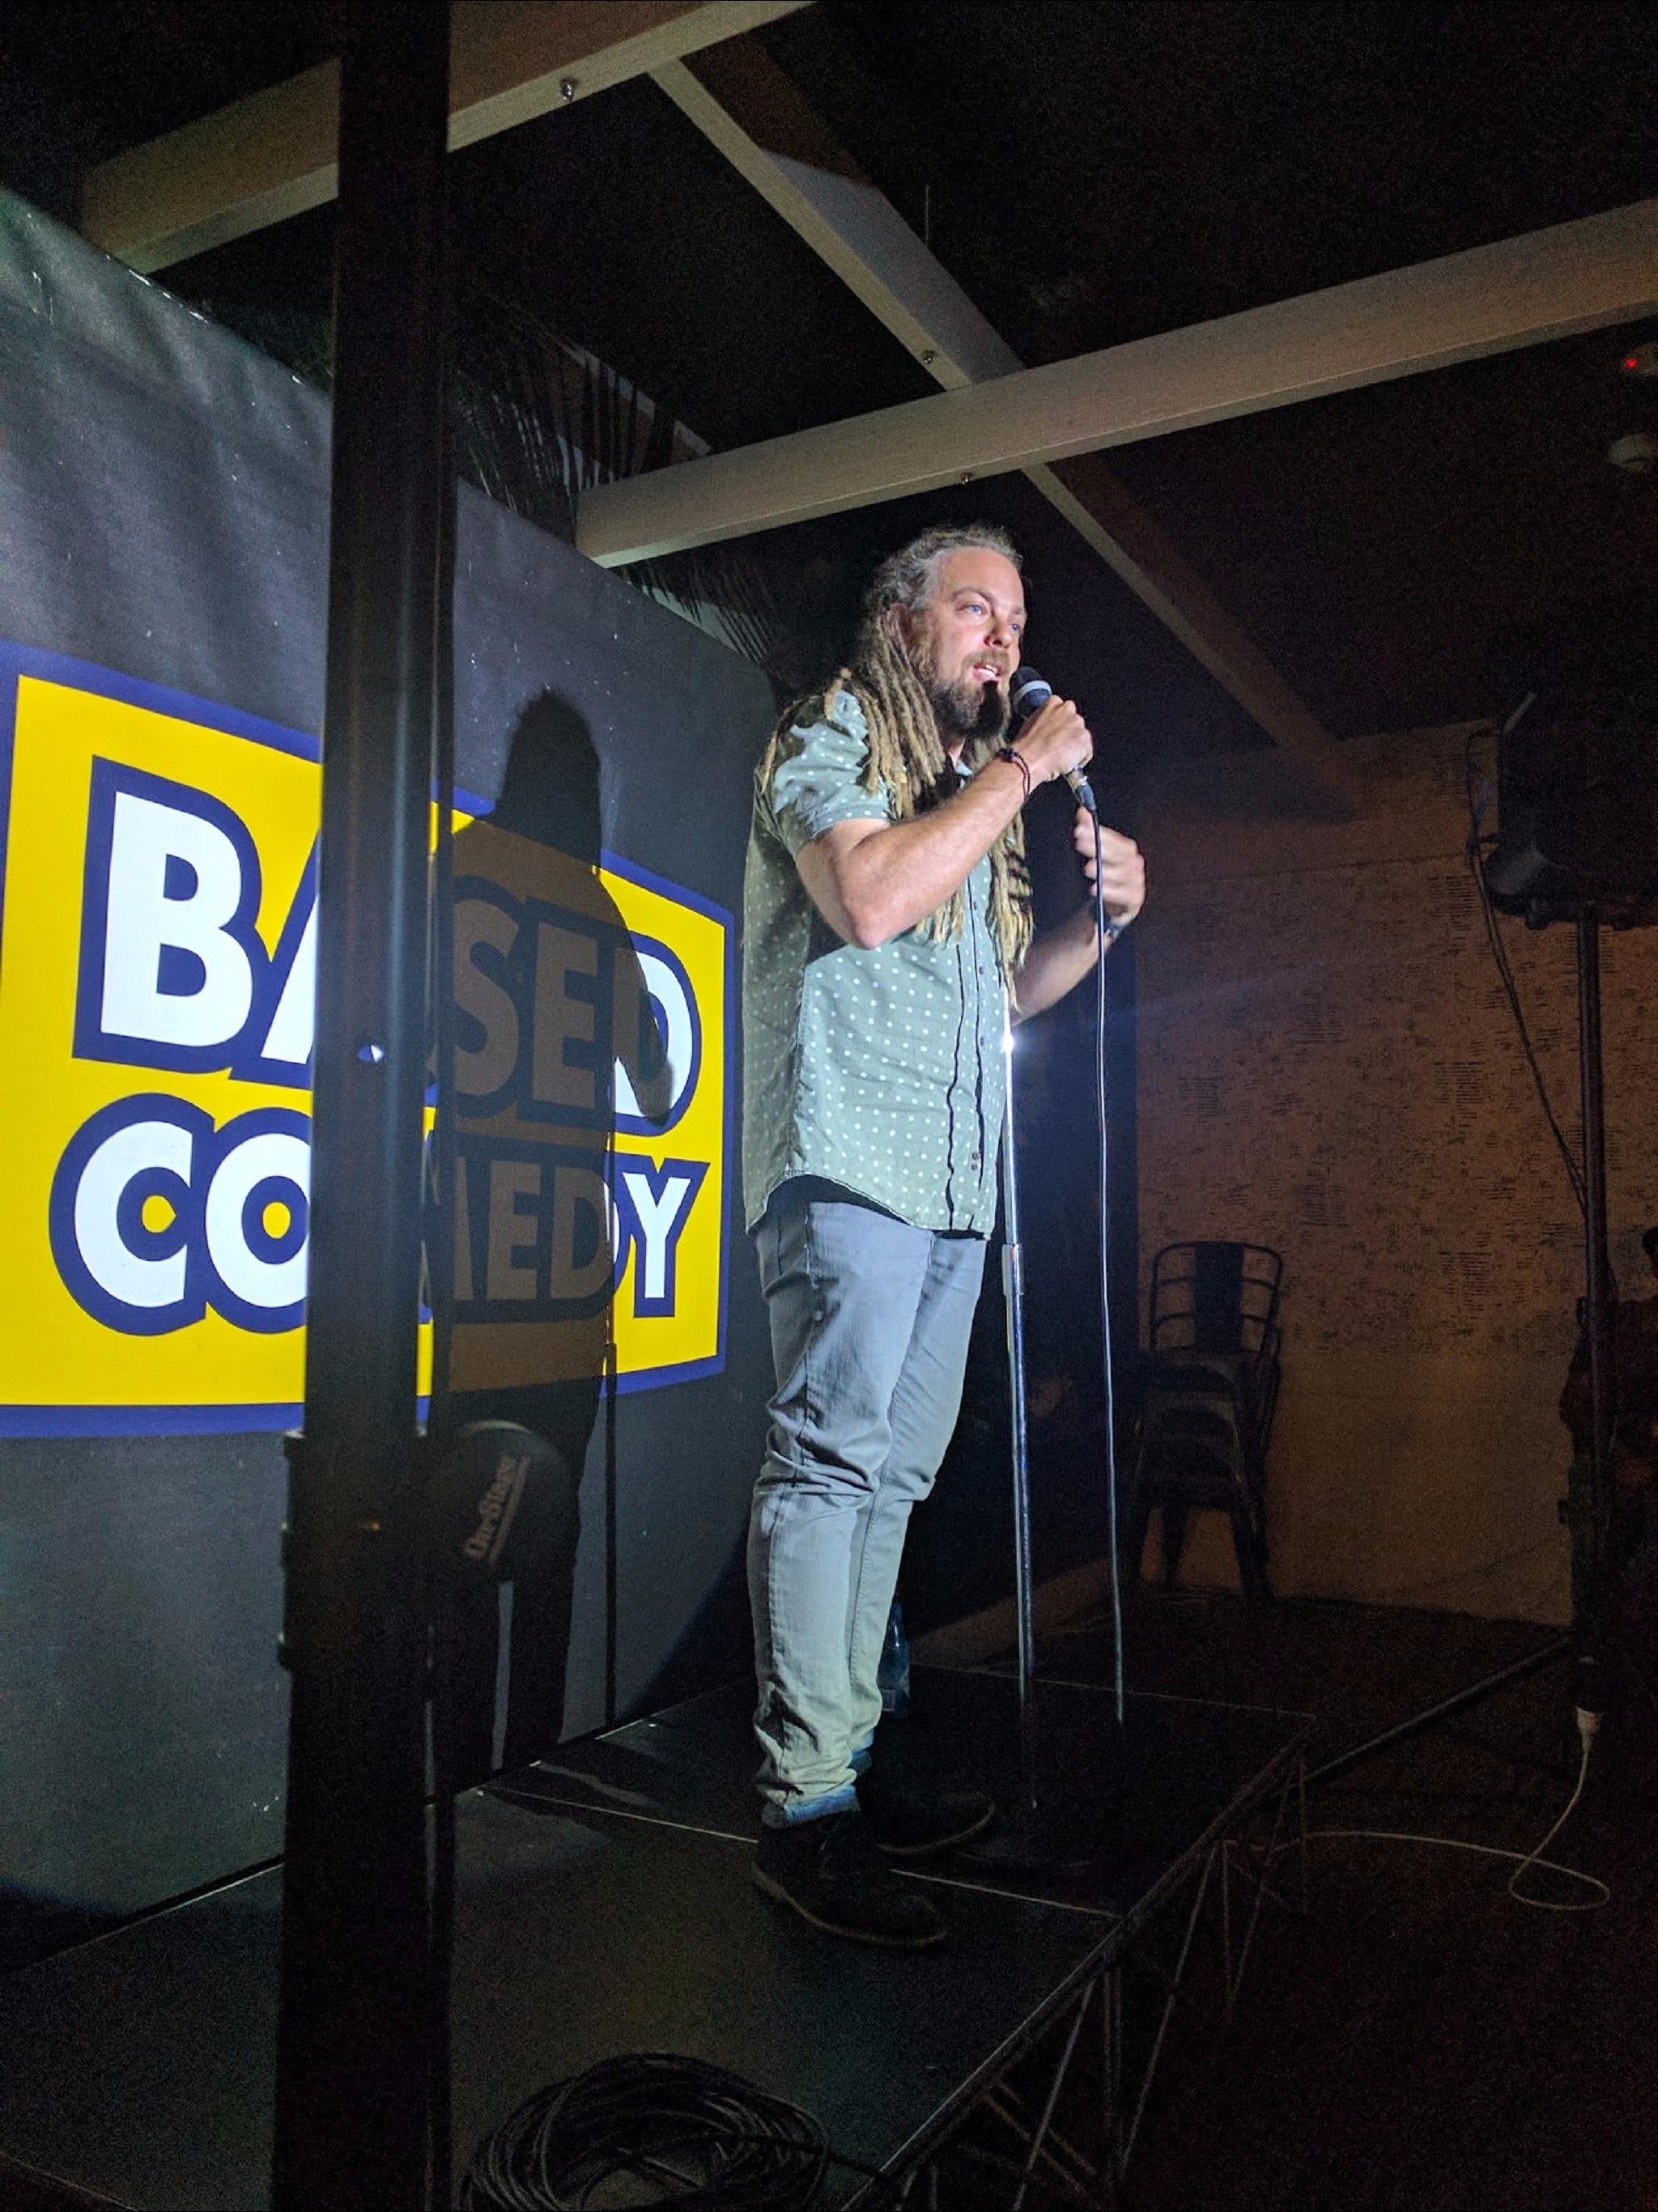 Based Comedy at The Palm Beach Hotel - Geraldton Accommodation